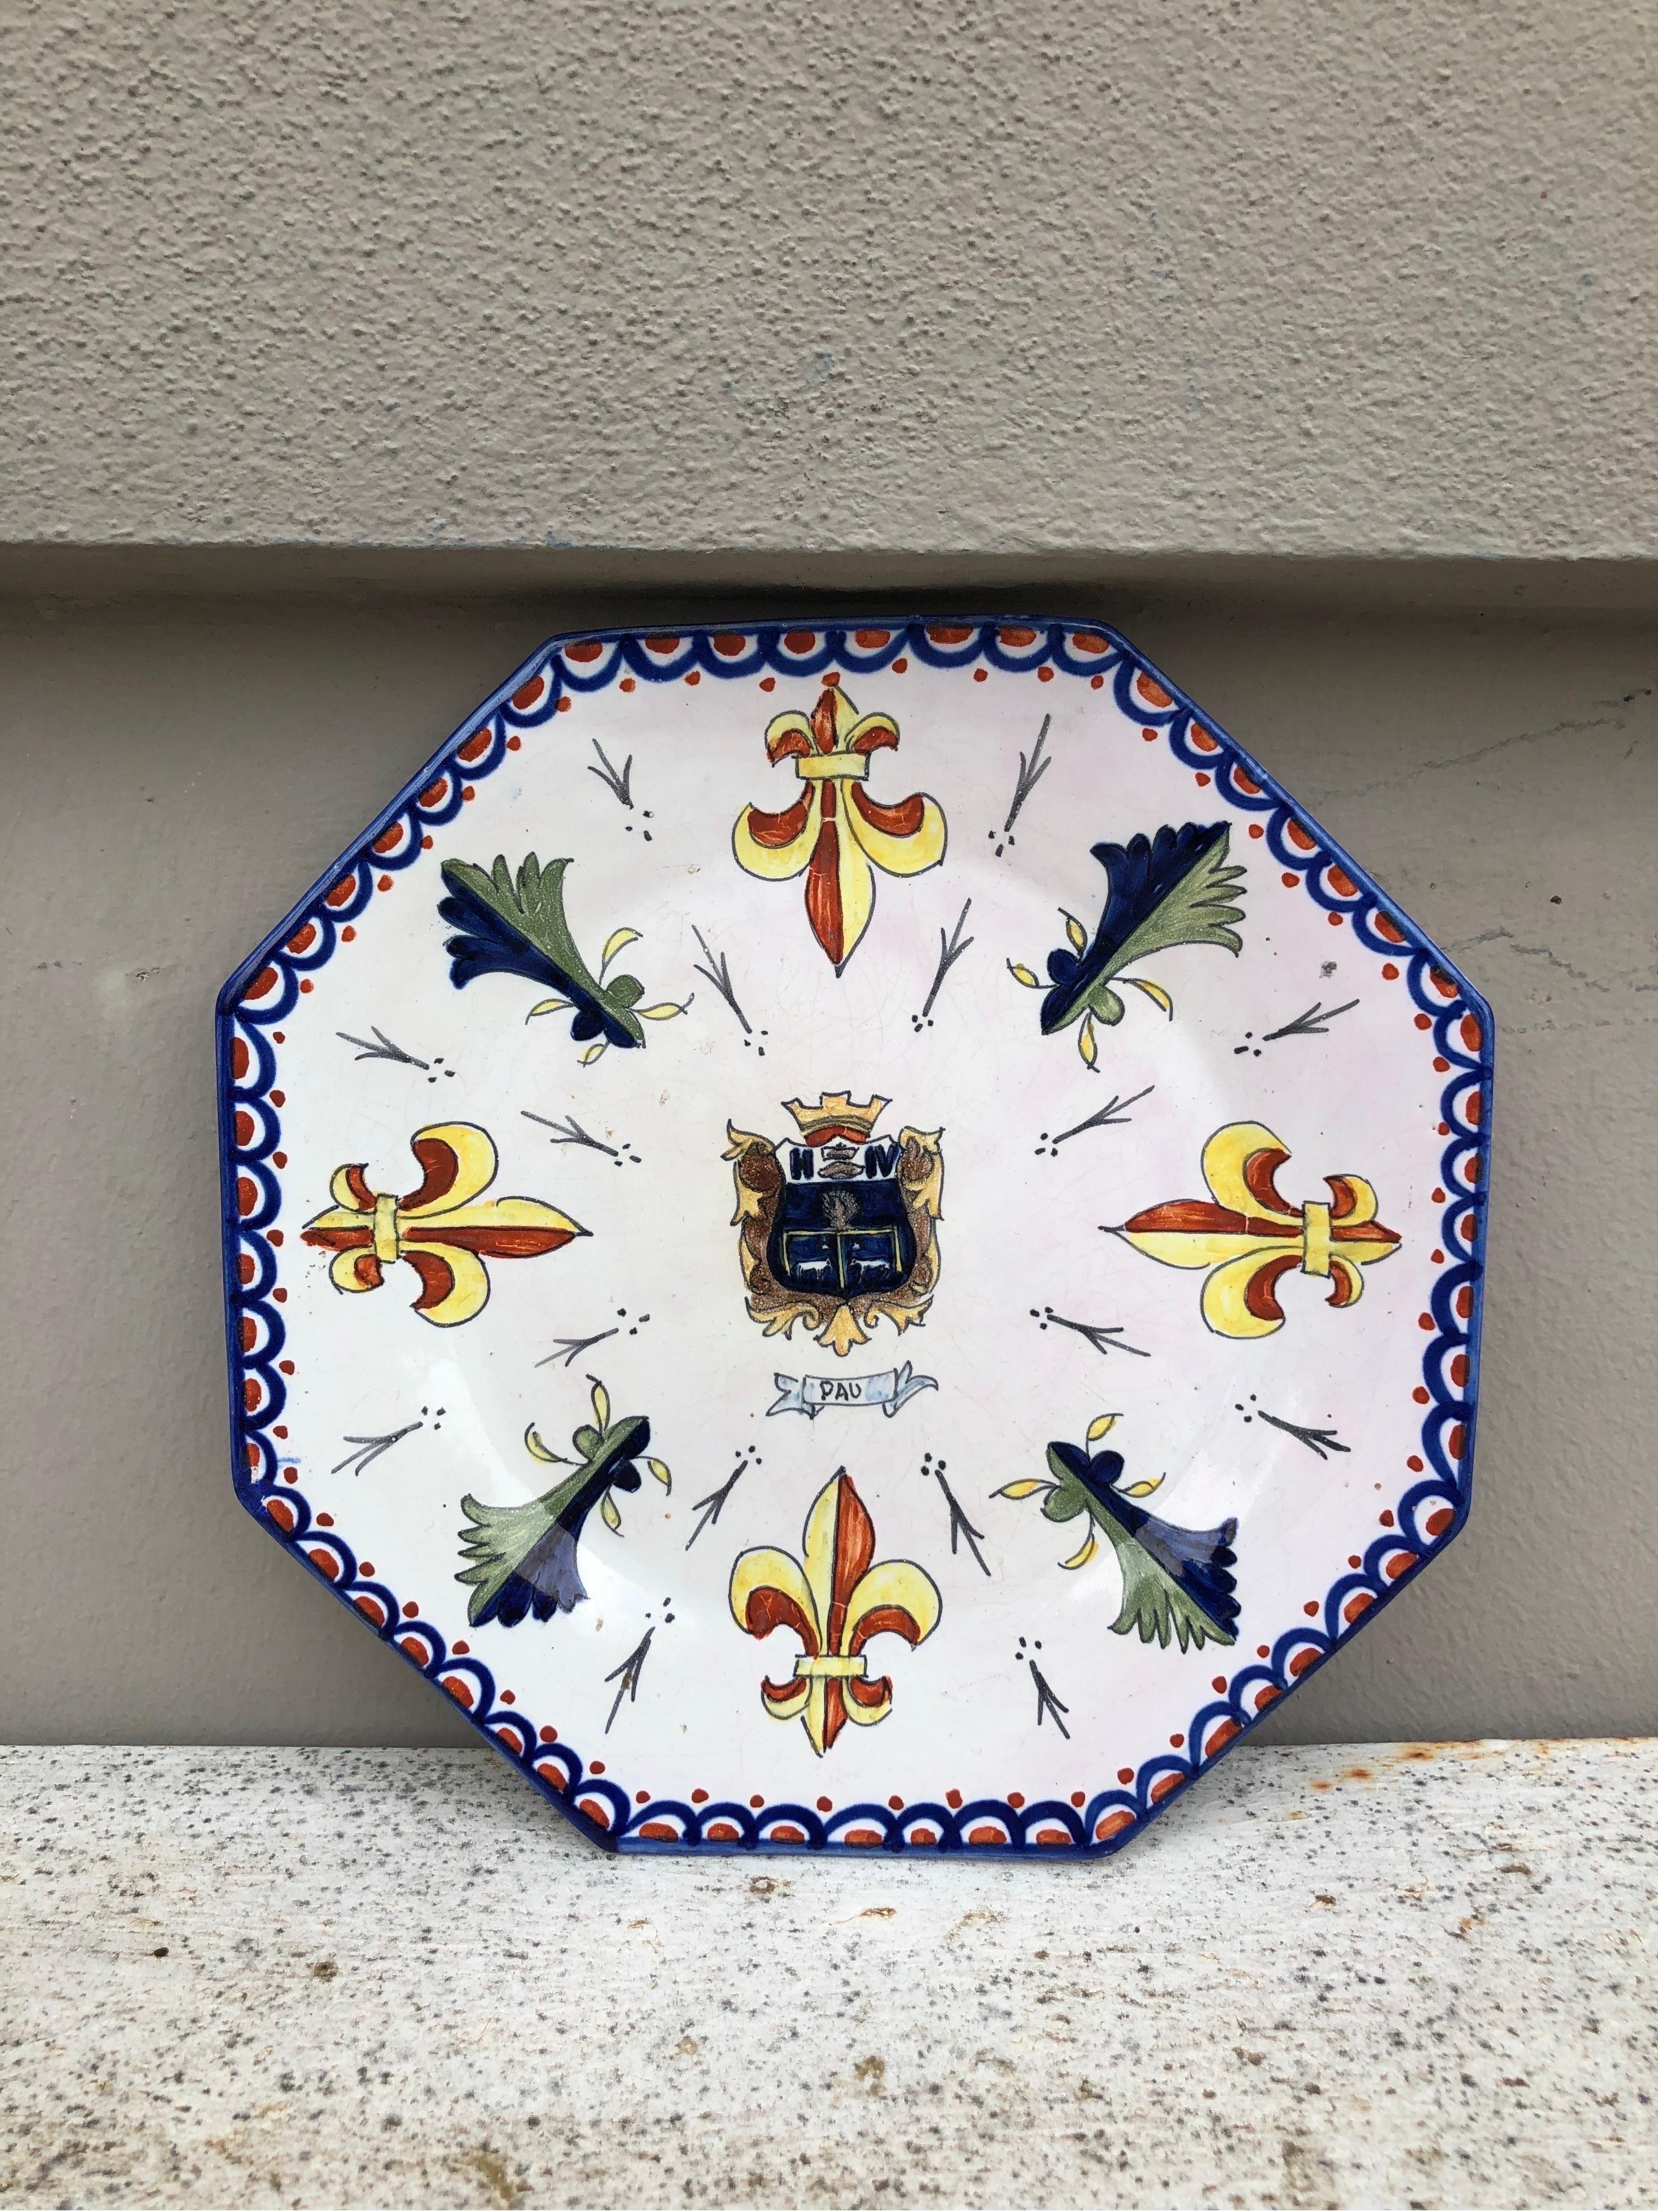 French Faience Octogonal Plate Fleur-De-Lis Circa 1900.
coat of arms on the center 